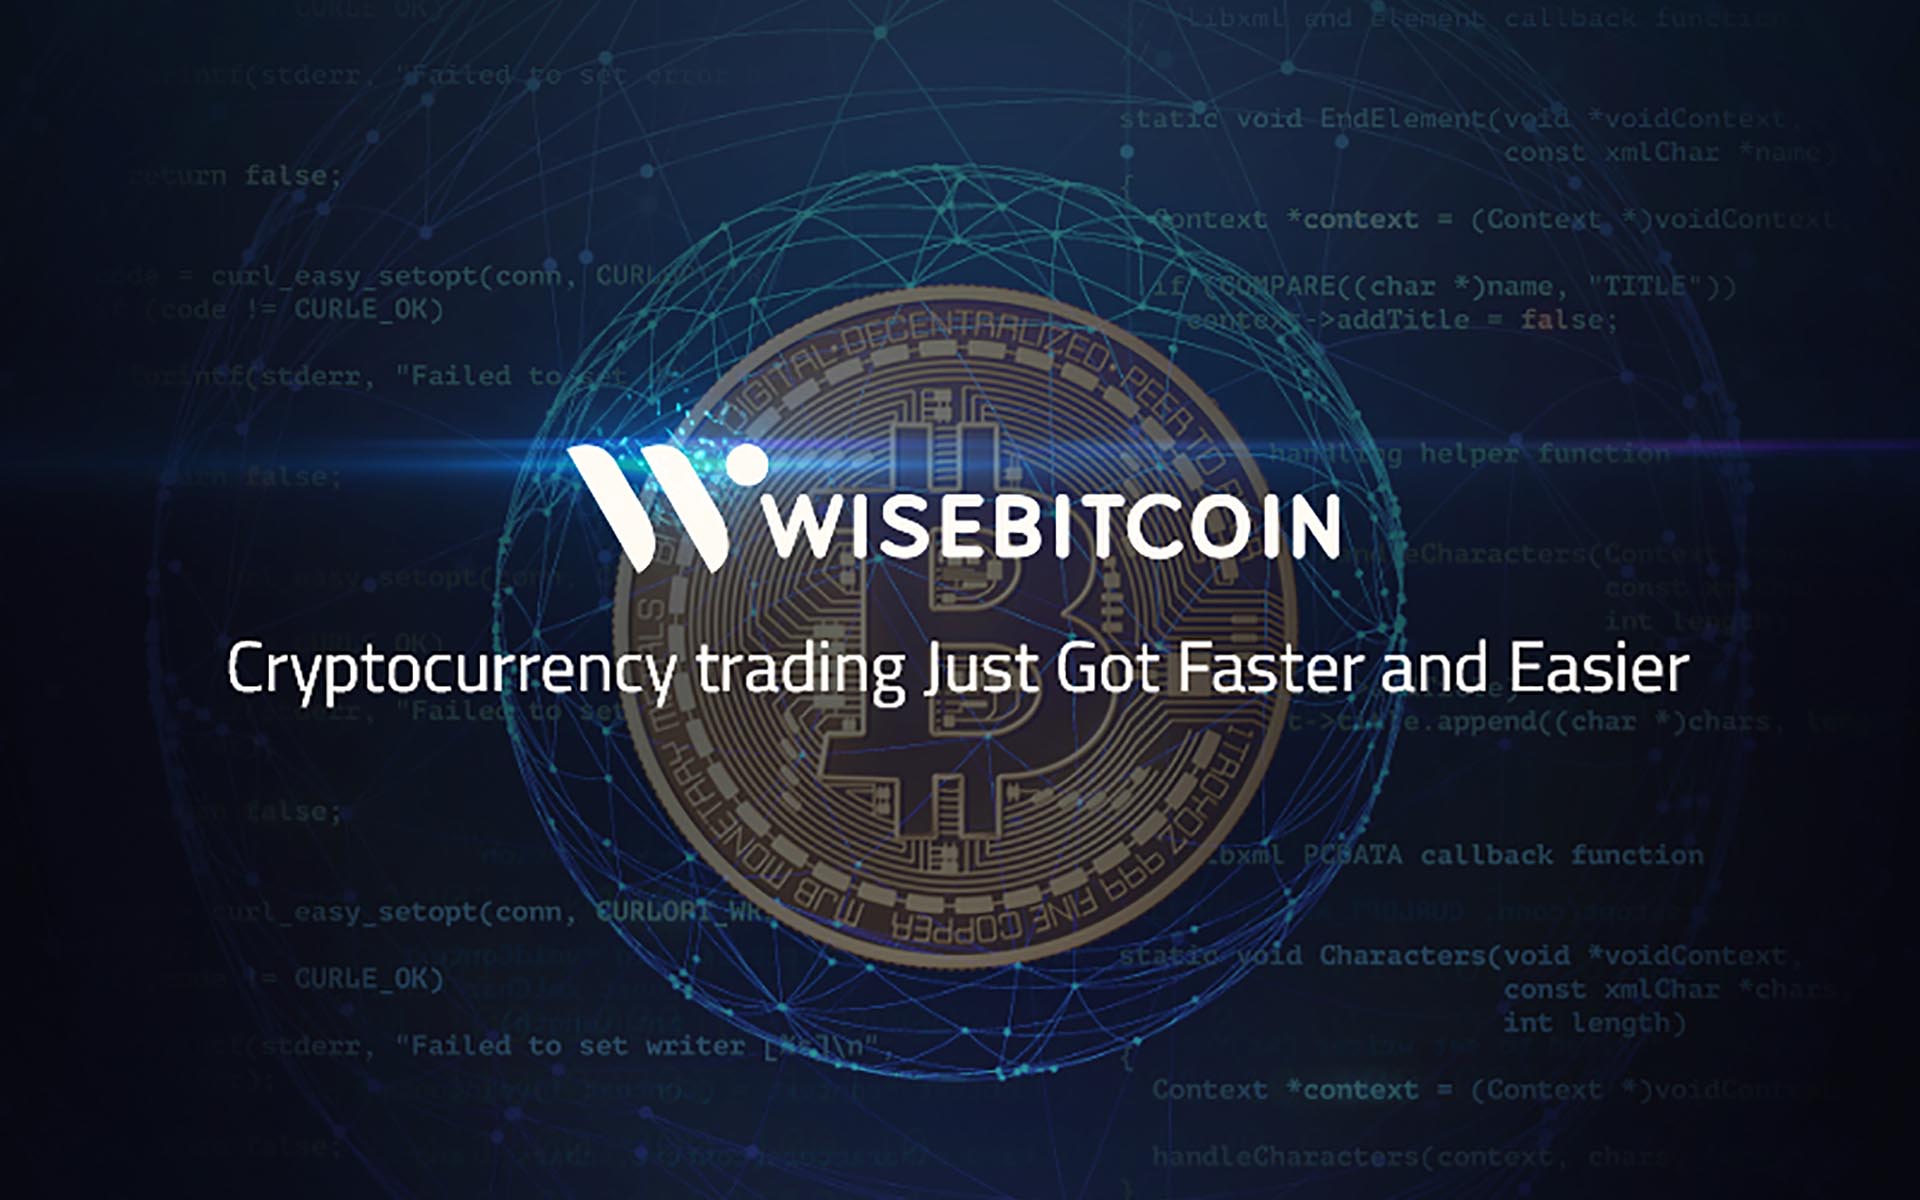 Wisebitcoin Launches the First Ever Cryptocurrency Trading Platform with Leverage Levels up to 20:1